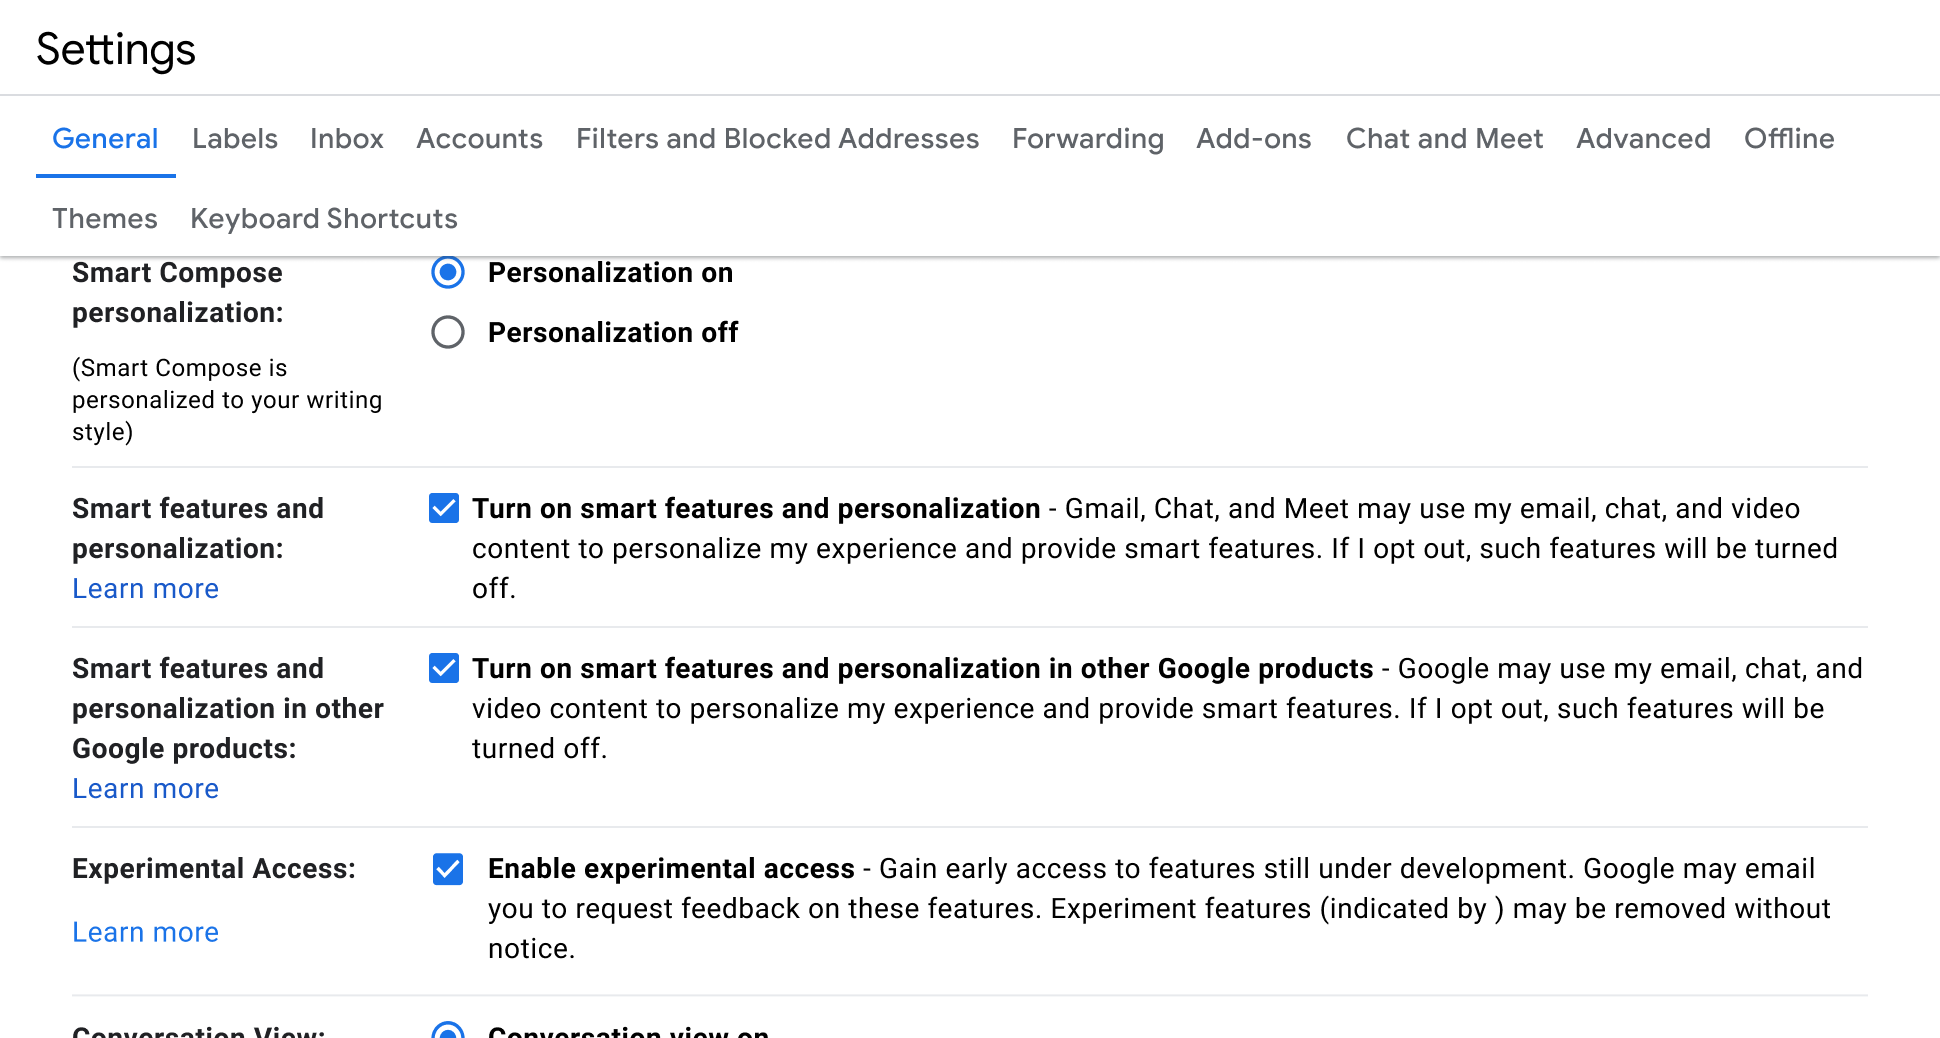 Smart features and personalization settings in Gmail settings